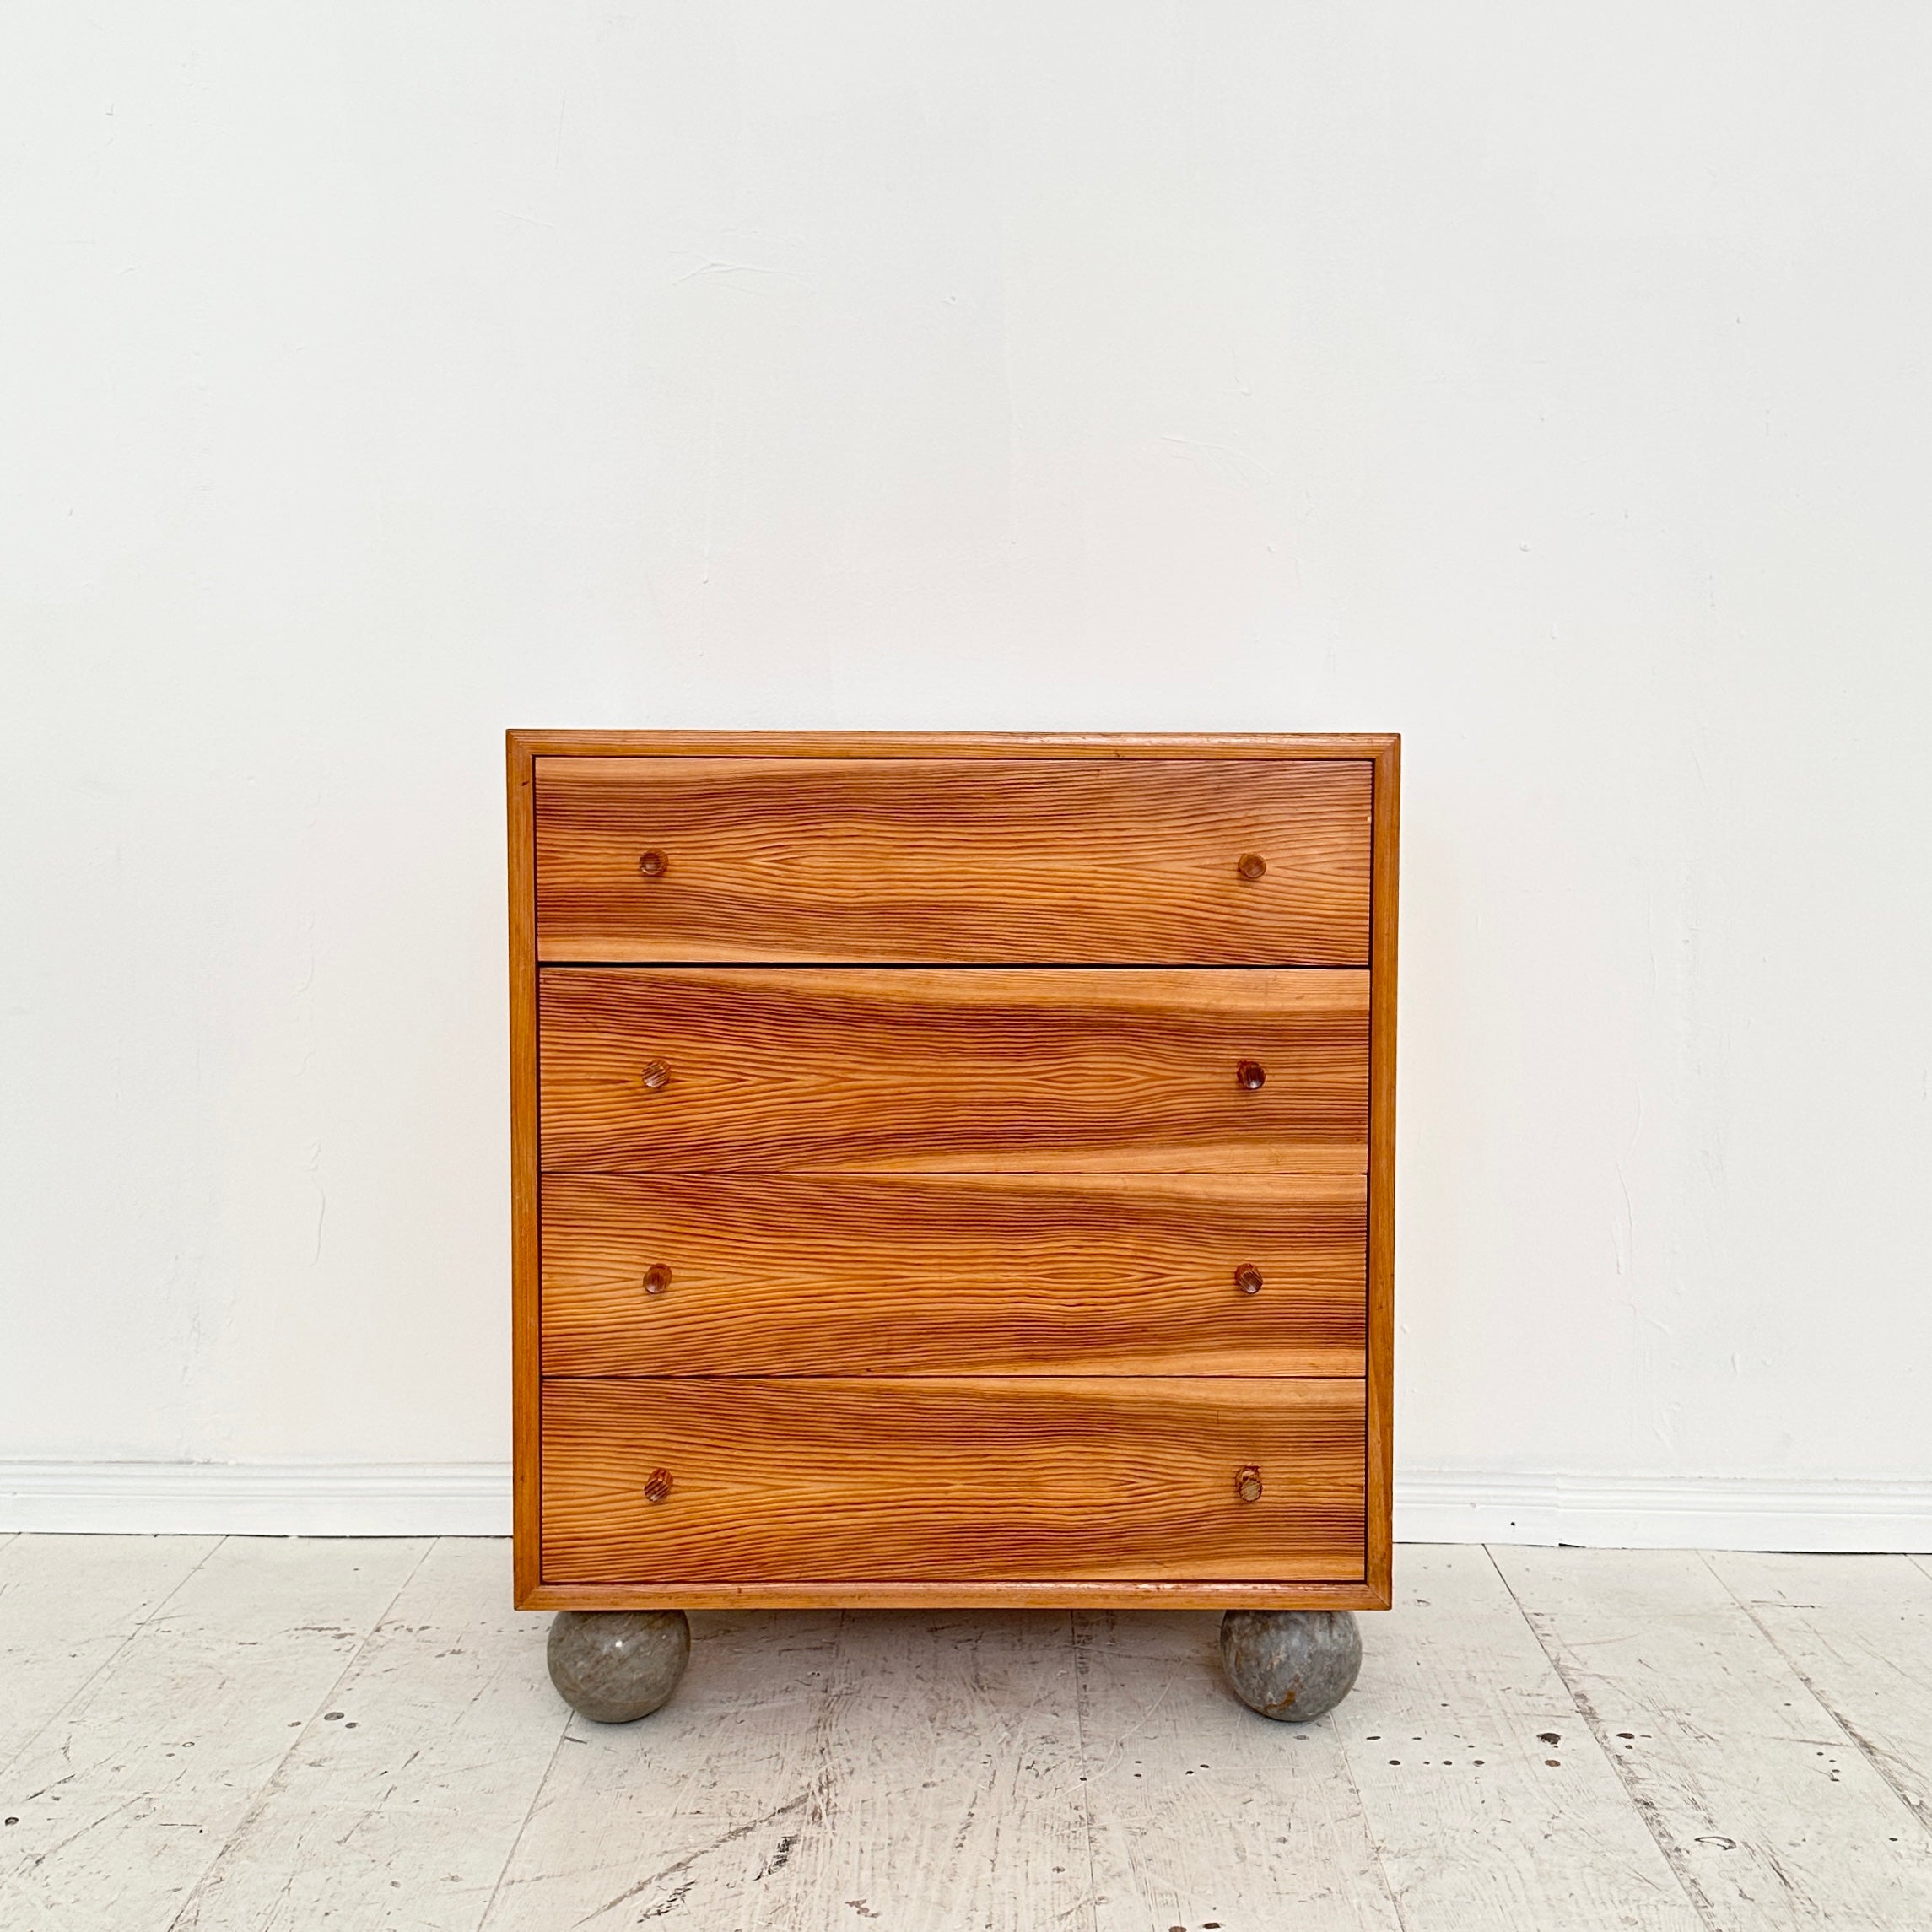 This fantastic Small Mid-Century Chest of Drawers in Spruce and with round  Marble Ball Feet was made around 1972.
The chest is in a great vintage condition.
A unique piece which is a great eye-catcher for your antique, modern, space age or